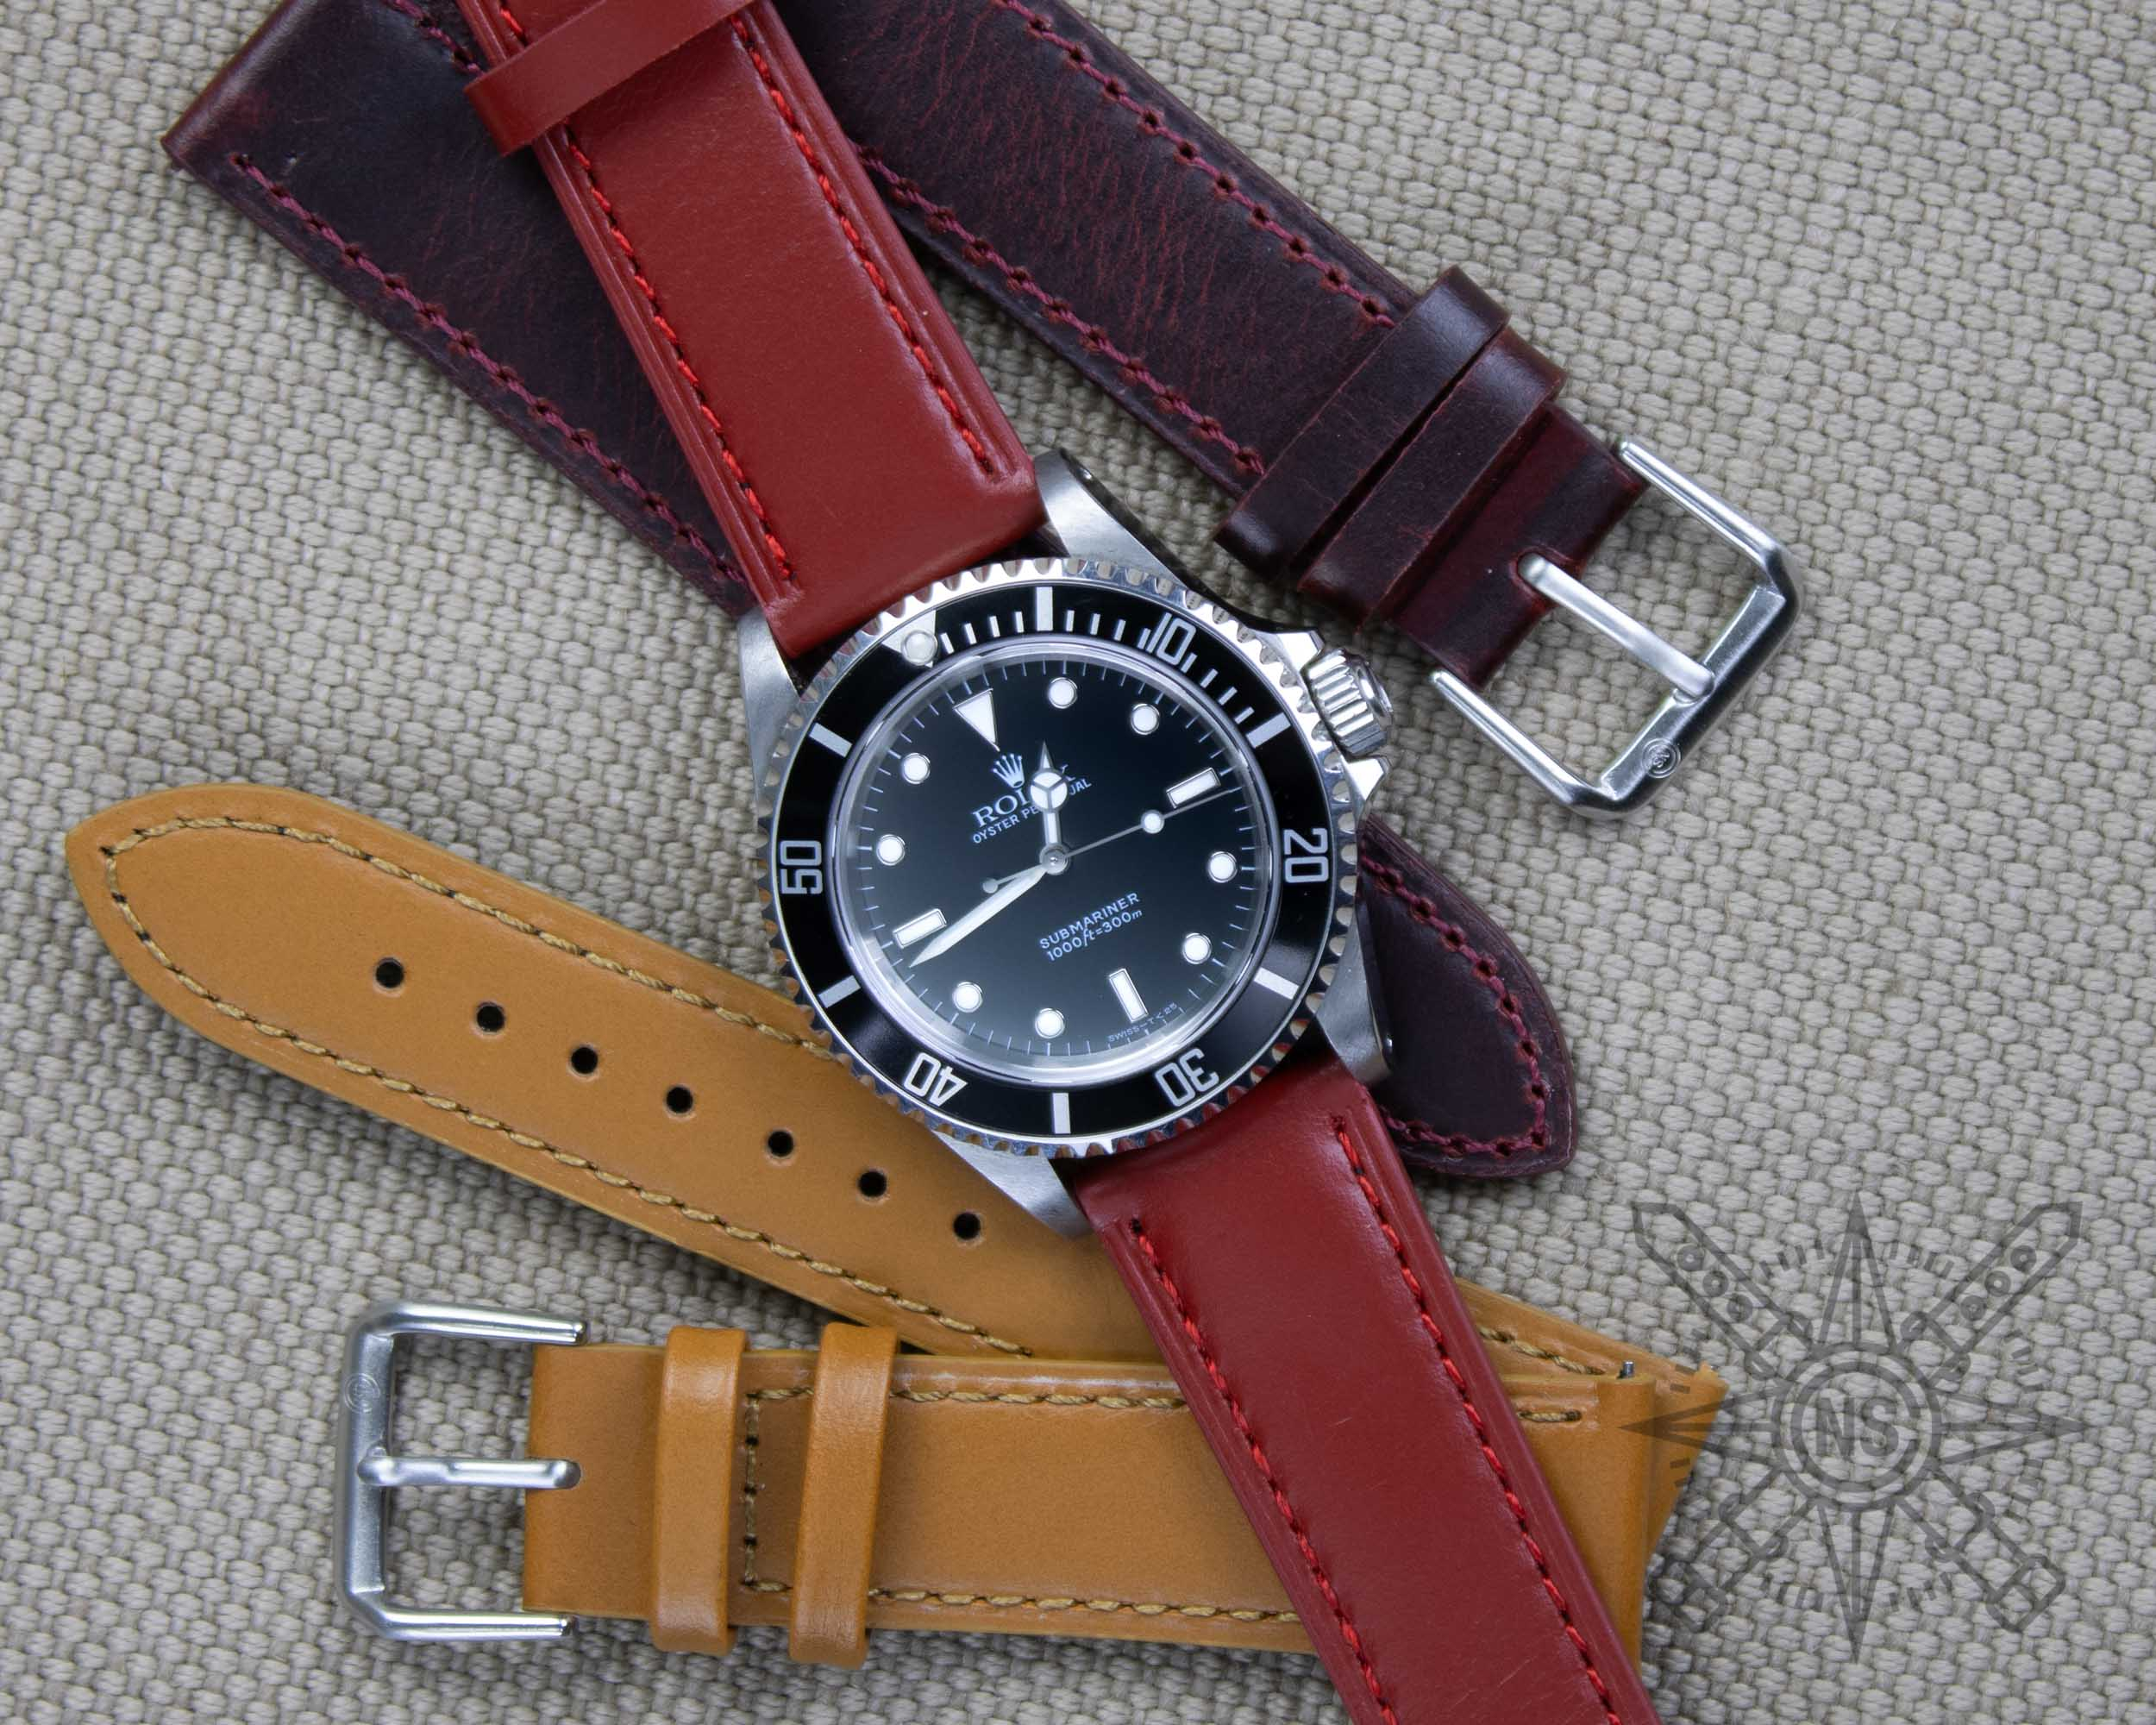 Exotic leather watch bands featuring distinctive scale patterns and finishes